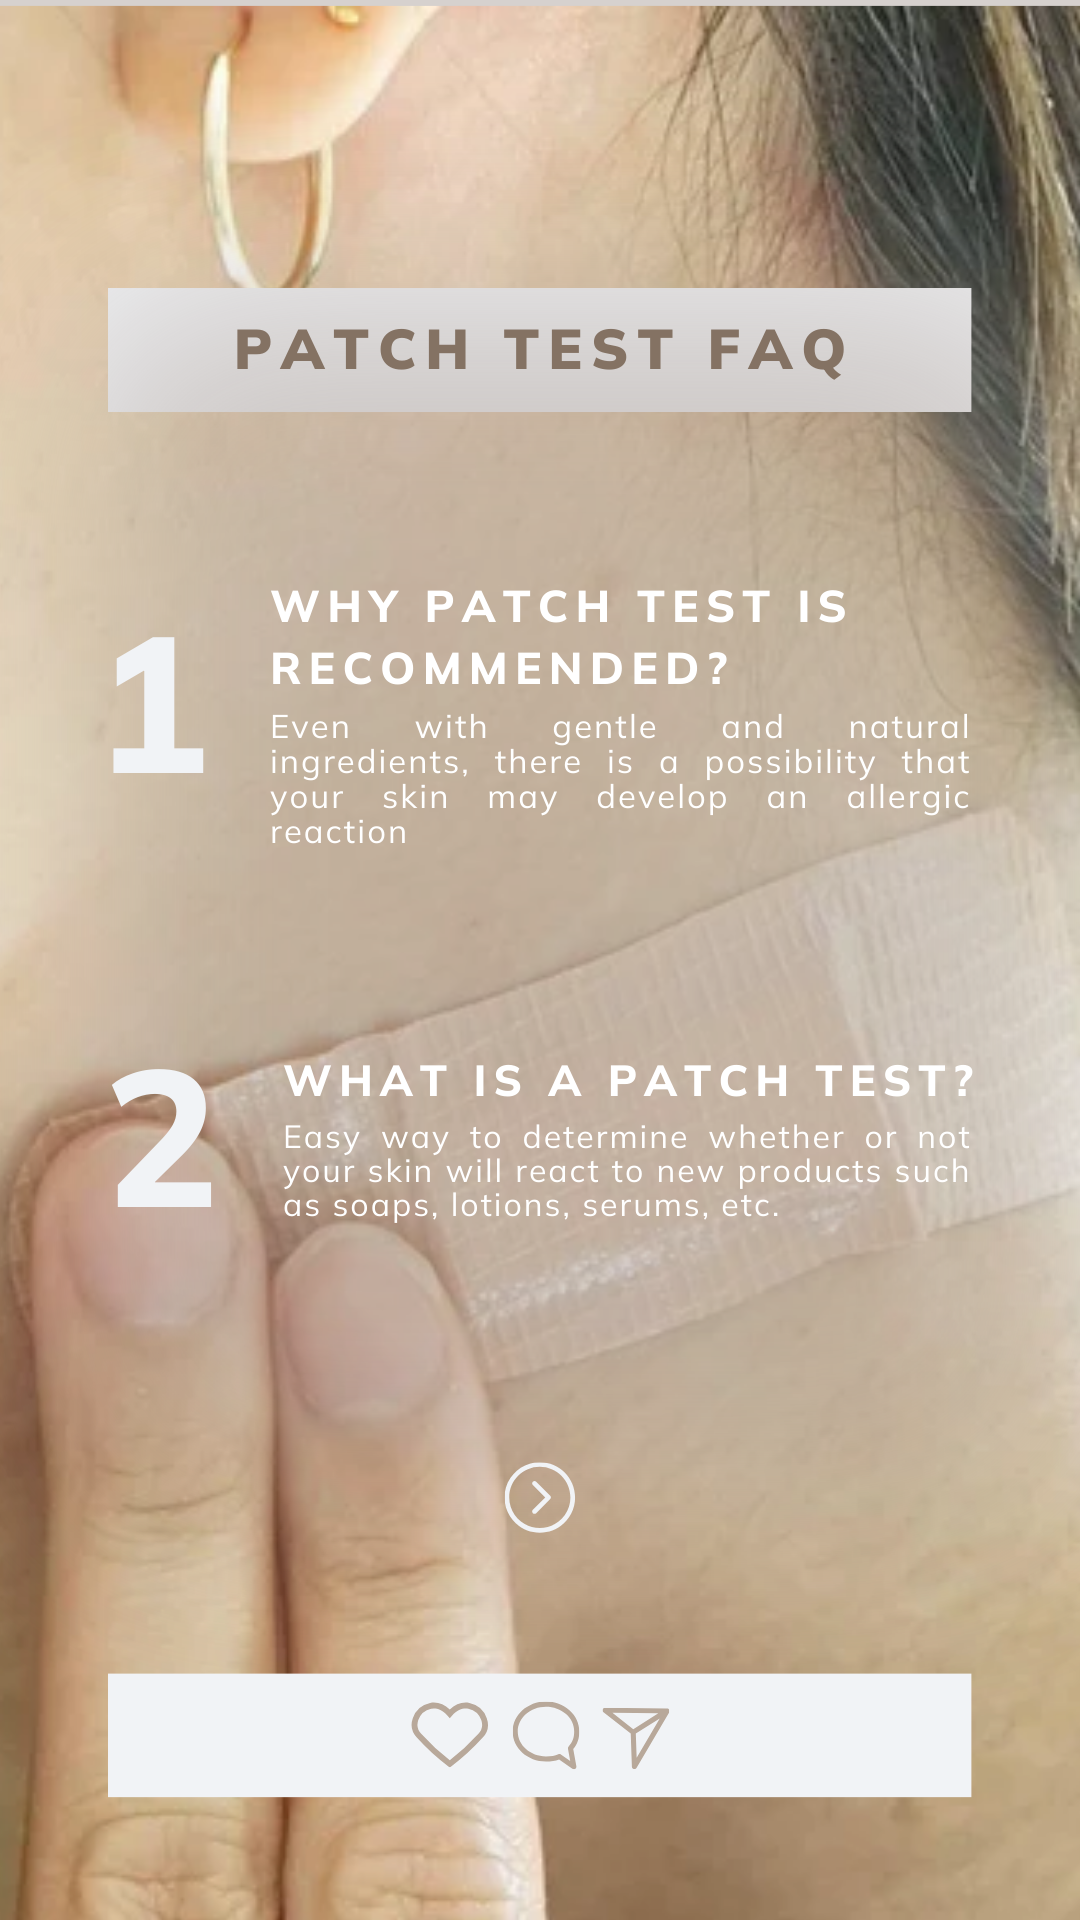 jubel,Skincare patch test, DIY Patch testing skincare products, How to patch test skincare, Skincare allergy test, Patch test for sensitive skin, Patch testing procedure, Allergic reaction to skincare, Skincare patch test guide